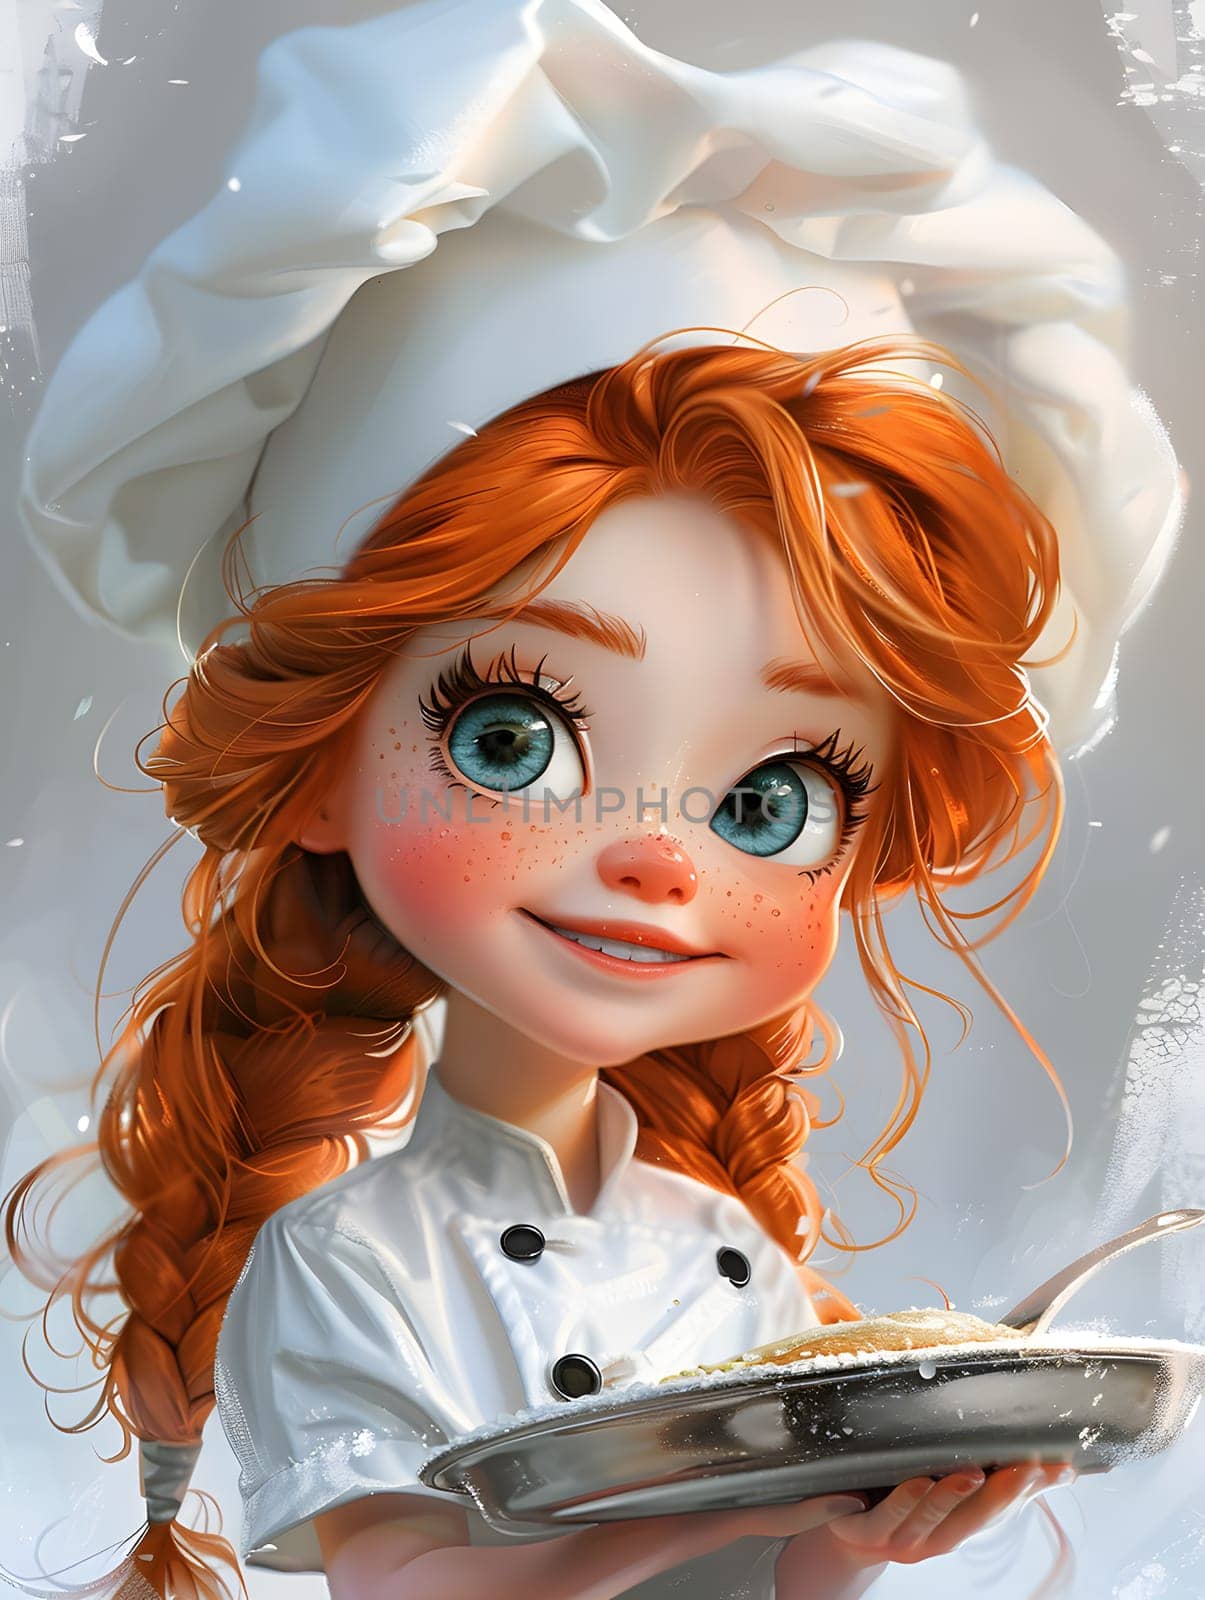 A cartoon girl with brown hair, bangs, and eyelash is wearing a chefs hat as a fashion accessory. She is holding a plate of food with a smile on her face